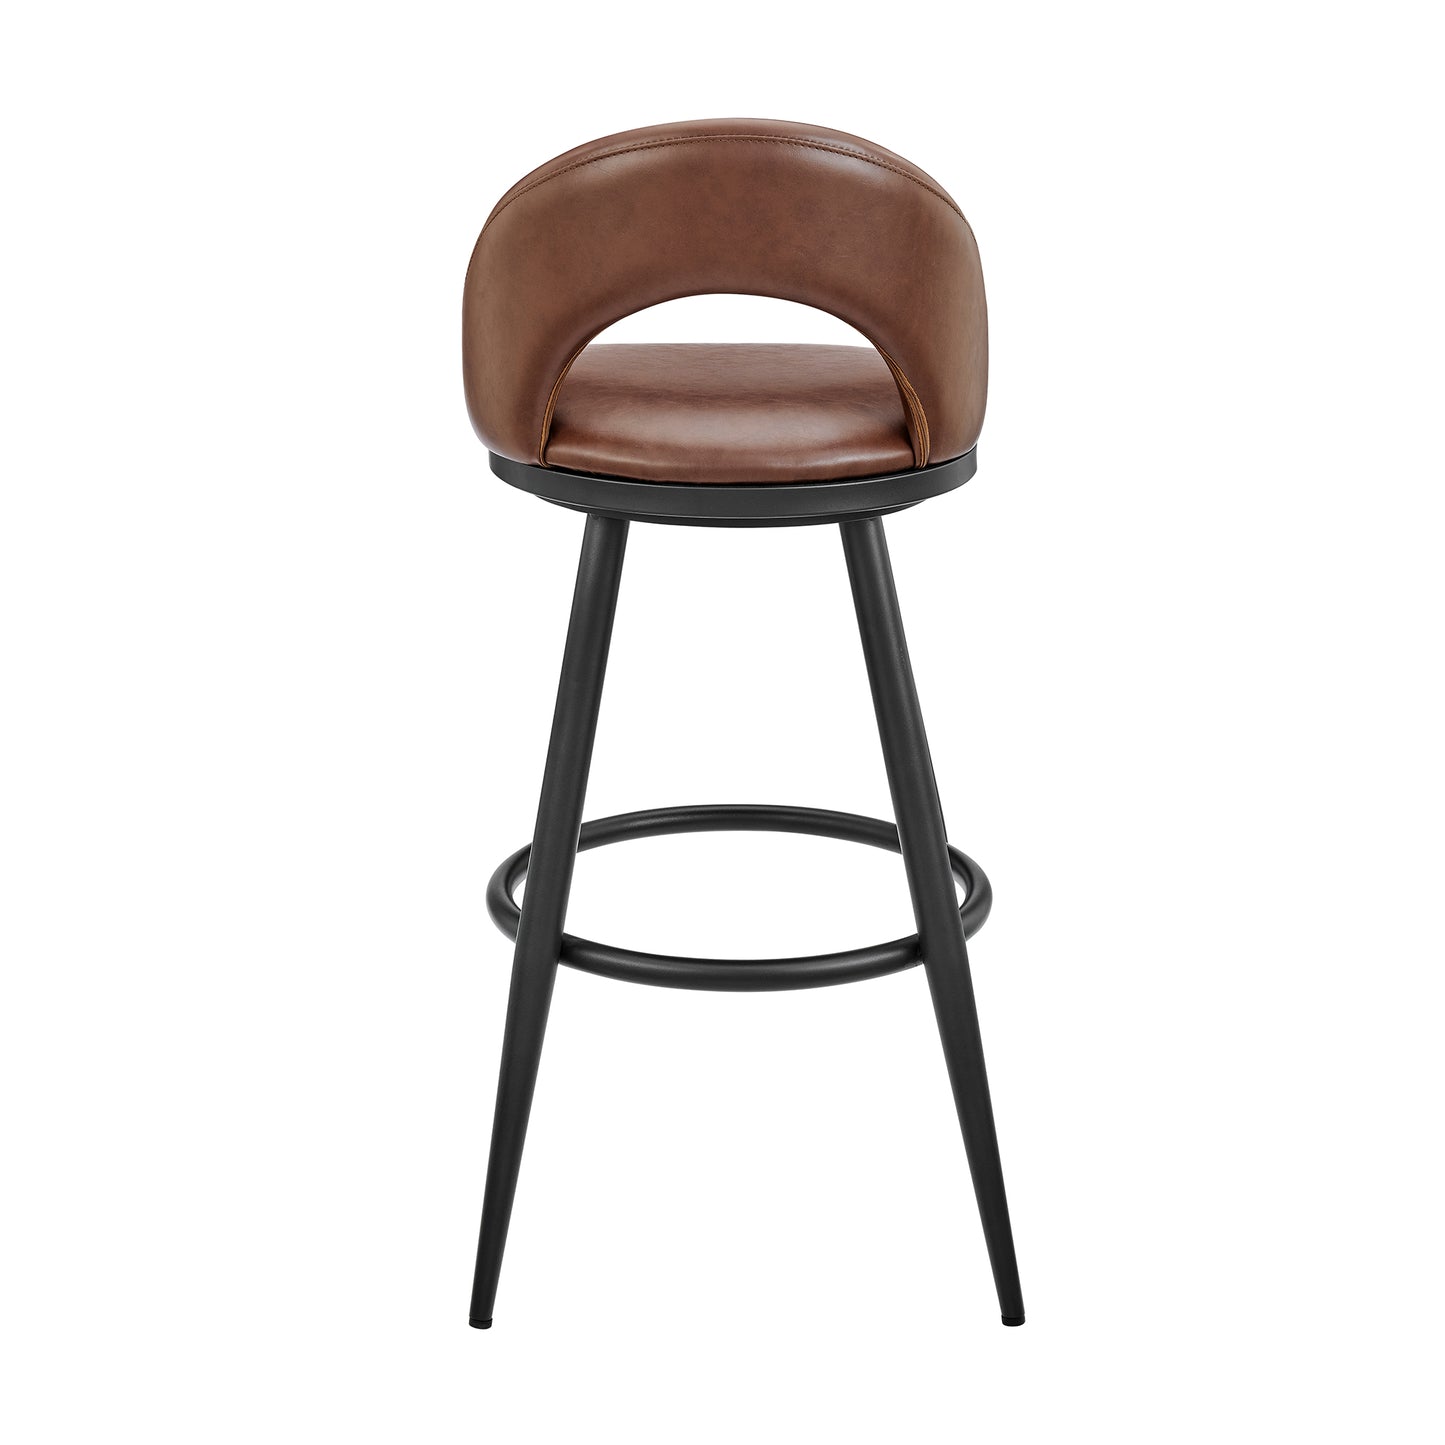 Lottech Swivel Counter Stool in Black Metal and Brown Faux Leather